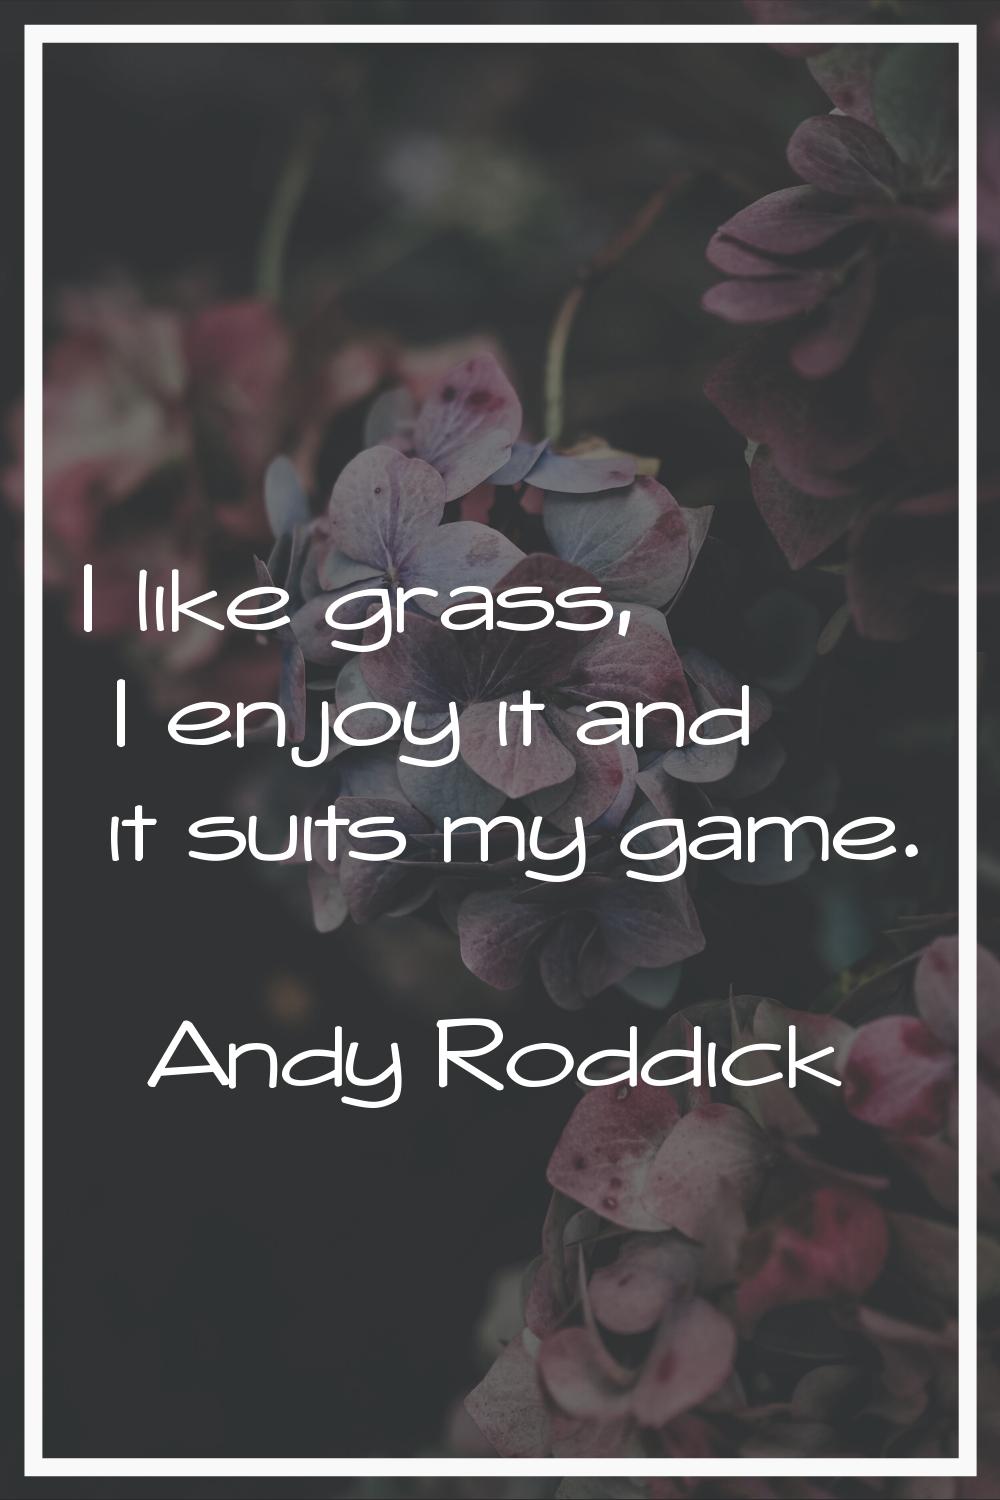 I like grass, I enjoy it and it suits my game.